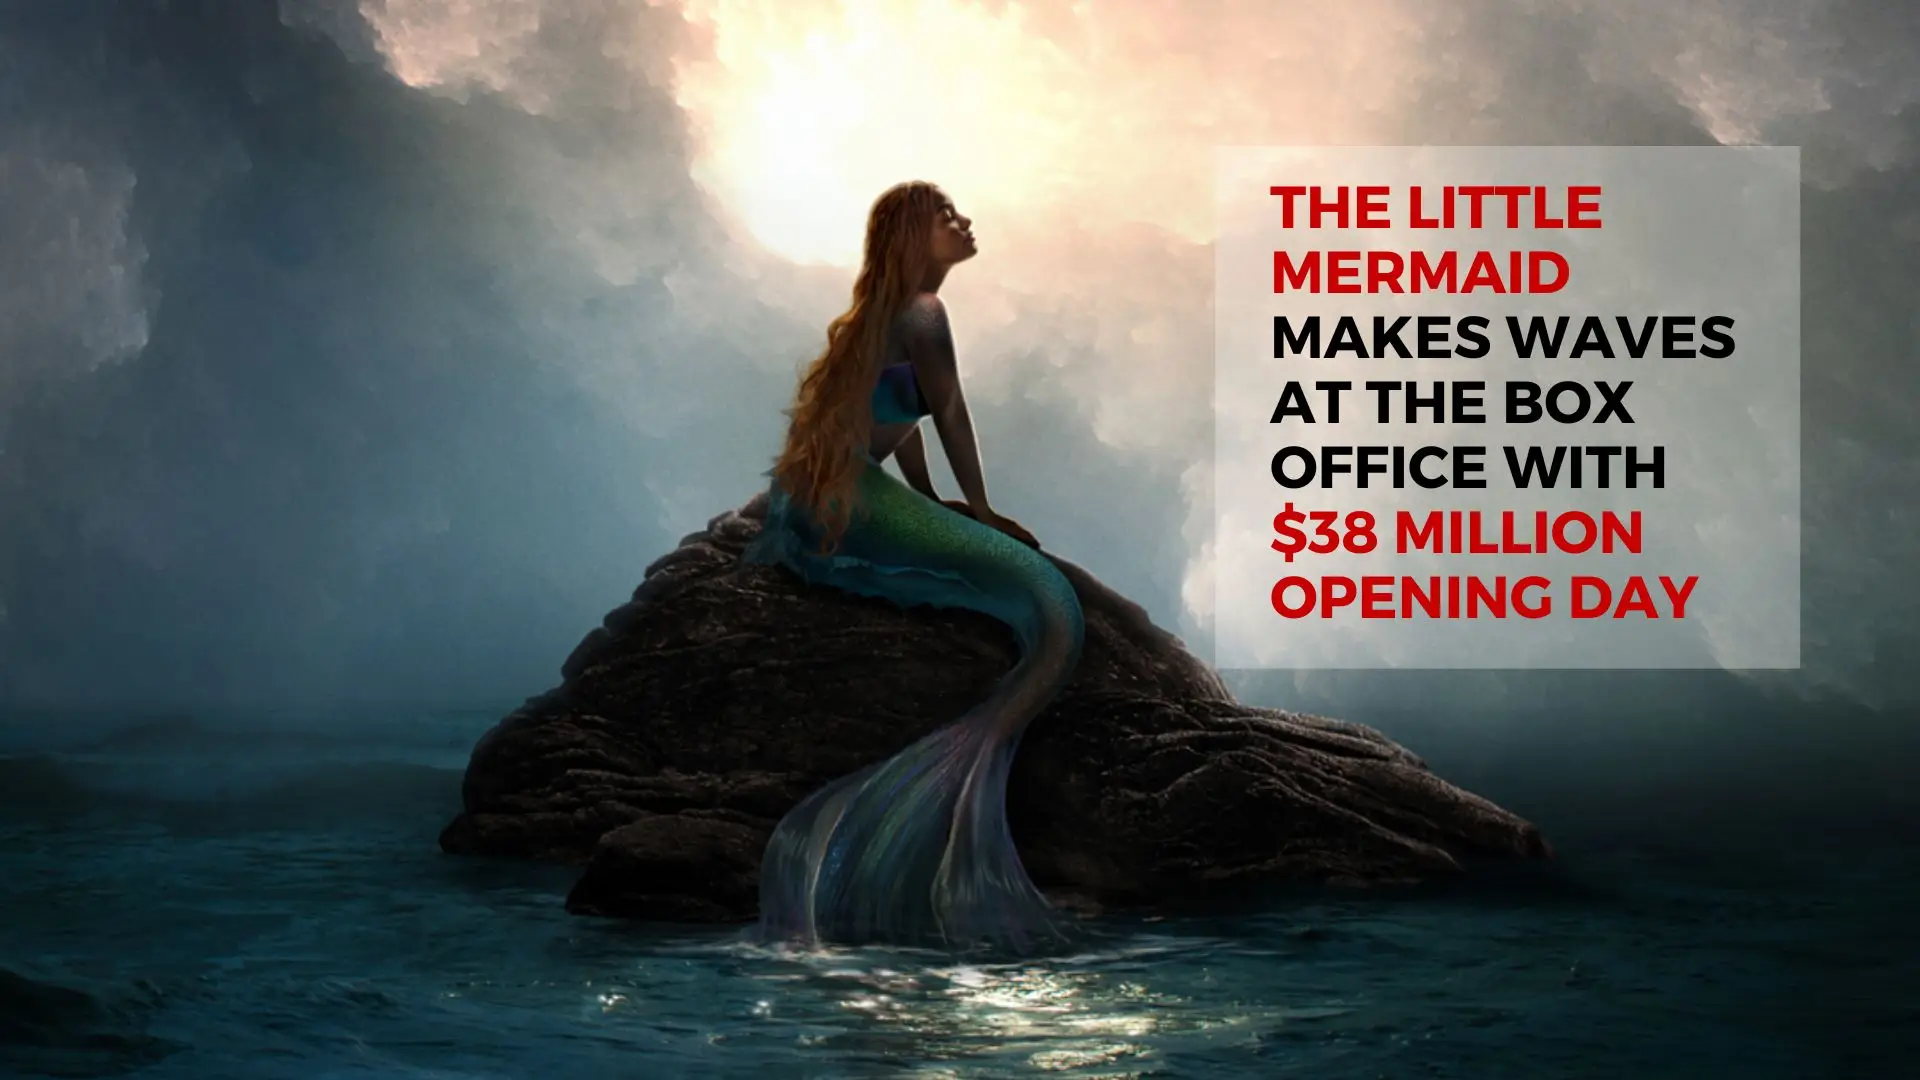 The Little Mermaid Makes Waves at the Box Office with $38 Million Opening Day